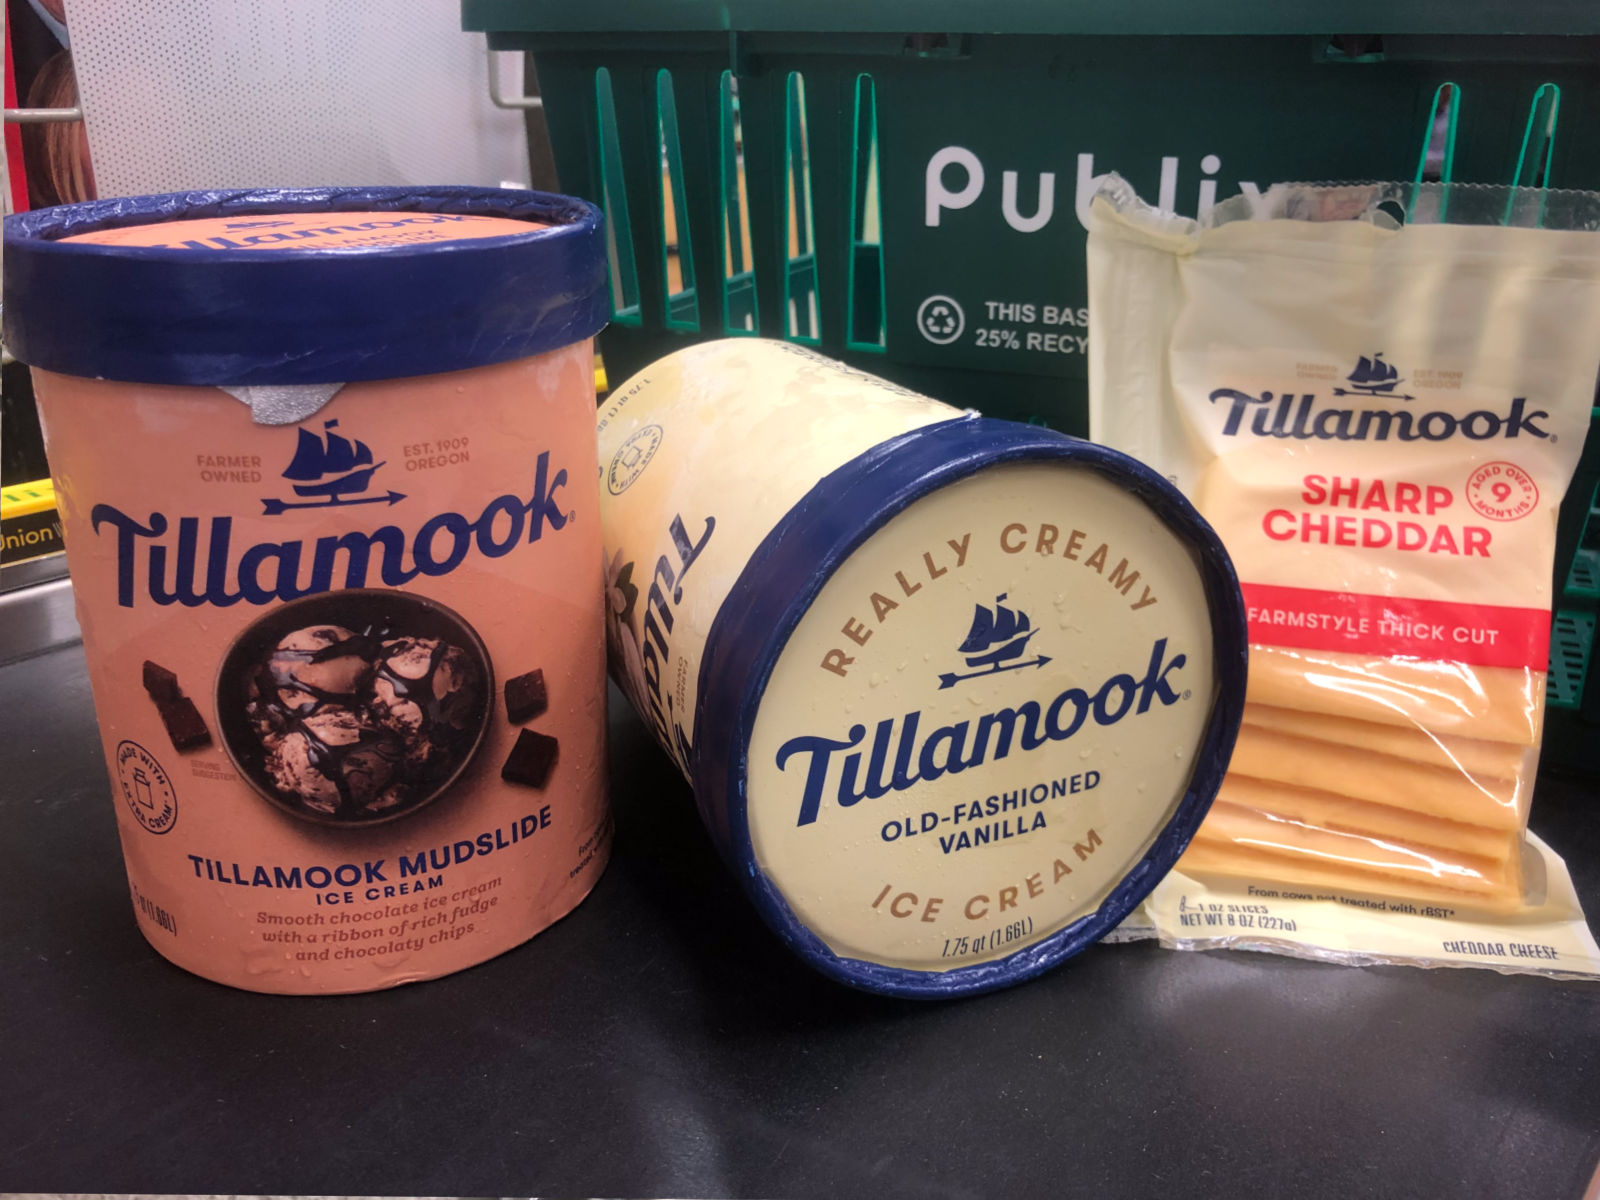 Free Tillamook Cheese When You Buy Tillamook Ice Cream At Publix - Clip Your Coupon And Save BIG! on I Heart Publix